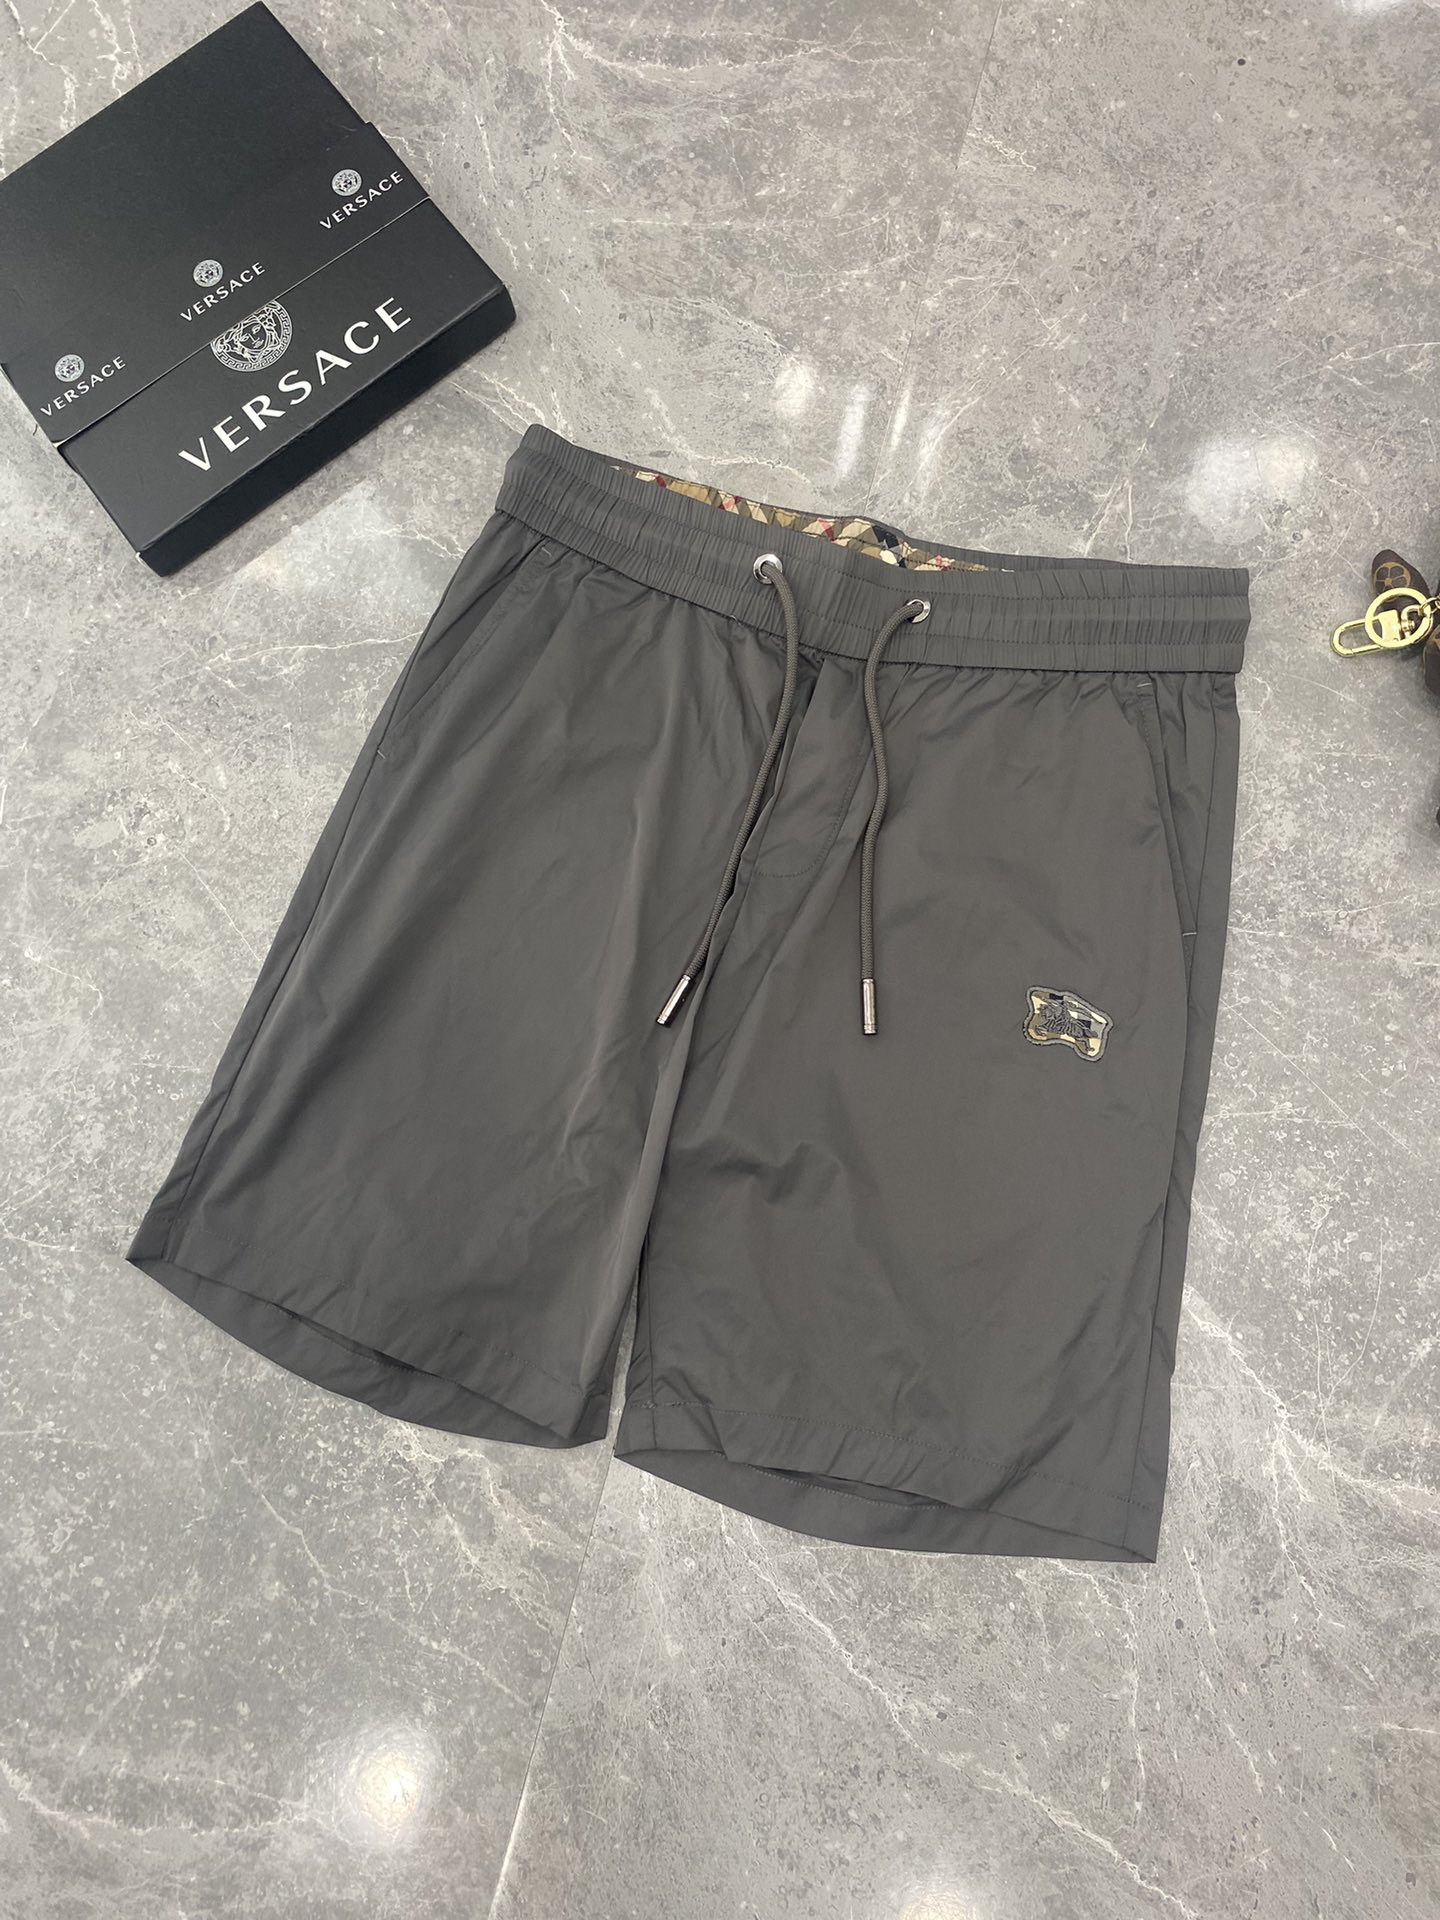 Burberry Clothing Shorts Unisex Cotton Summer Collection Fashion